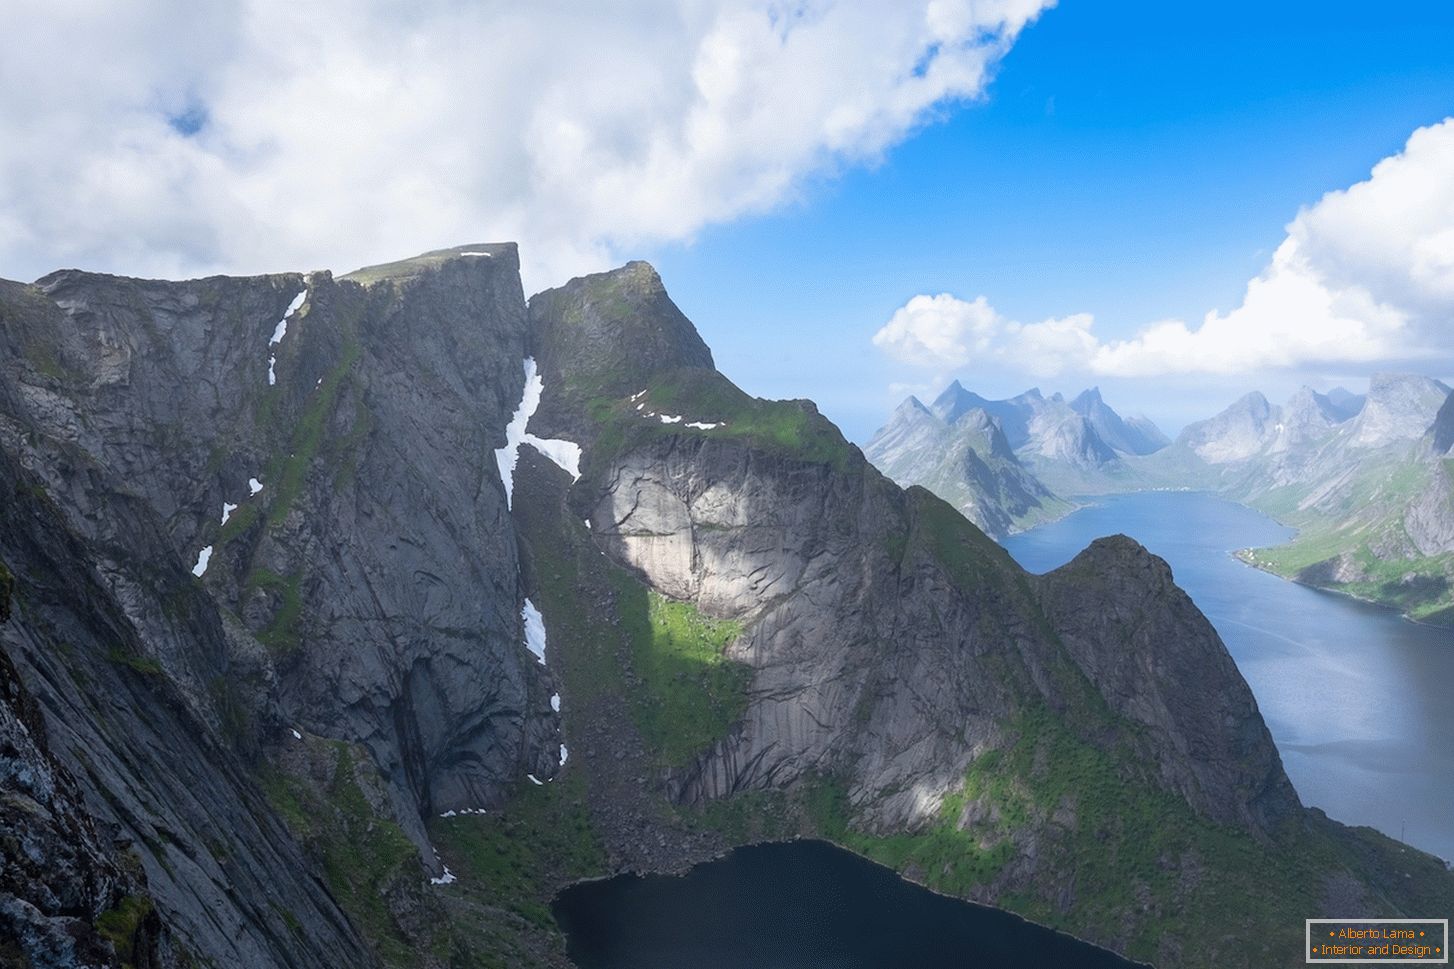 An unforgettable view from a bird's eye view of the mountains of Norway